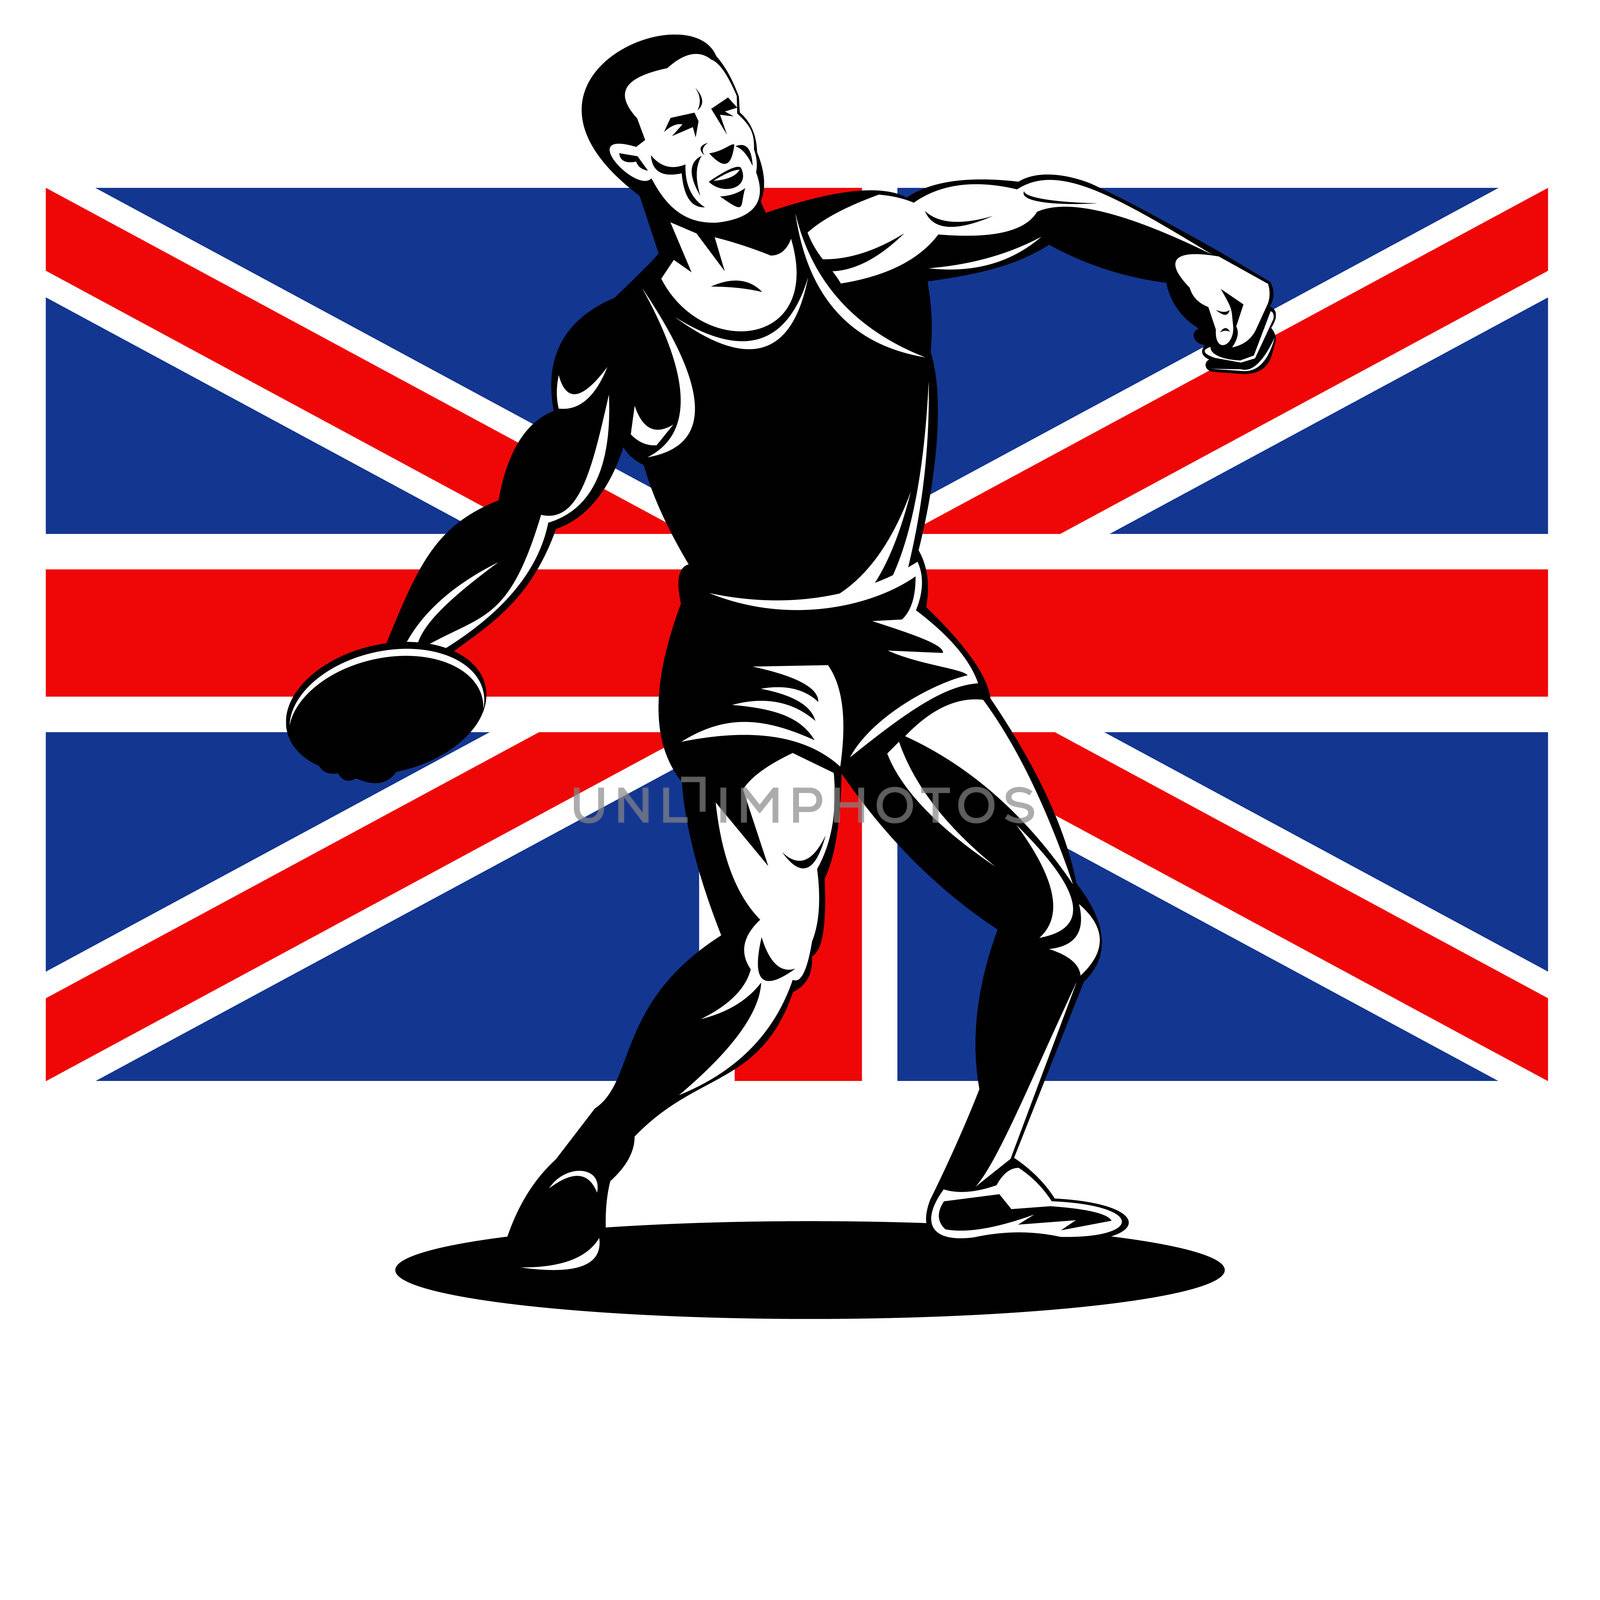 Illustration of an athlete Discus Throw with Union Jack British UK Flag done in retro style.
